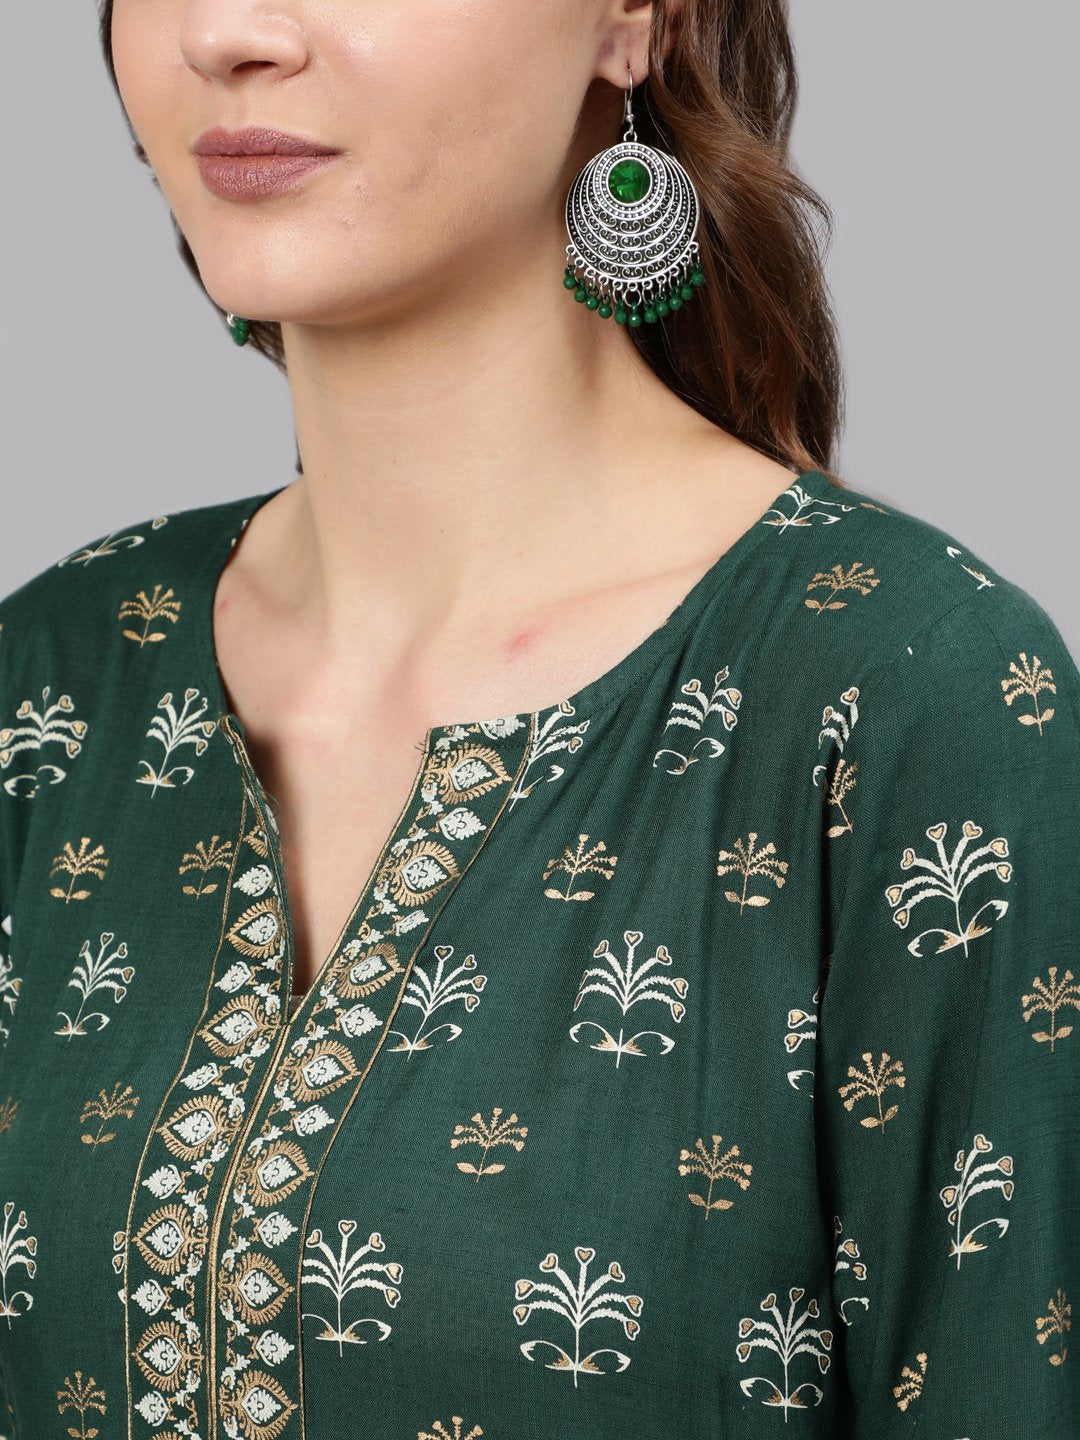 Women's Green & Gold Printed Tunic With Three Quarter Sleeves - Nayo Clothing